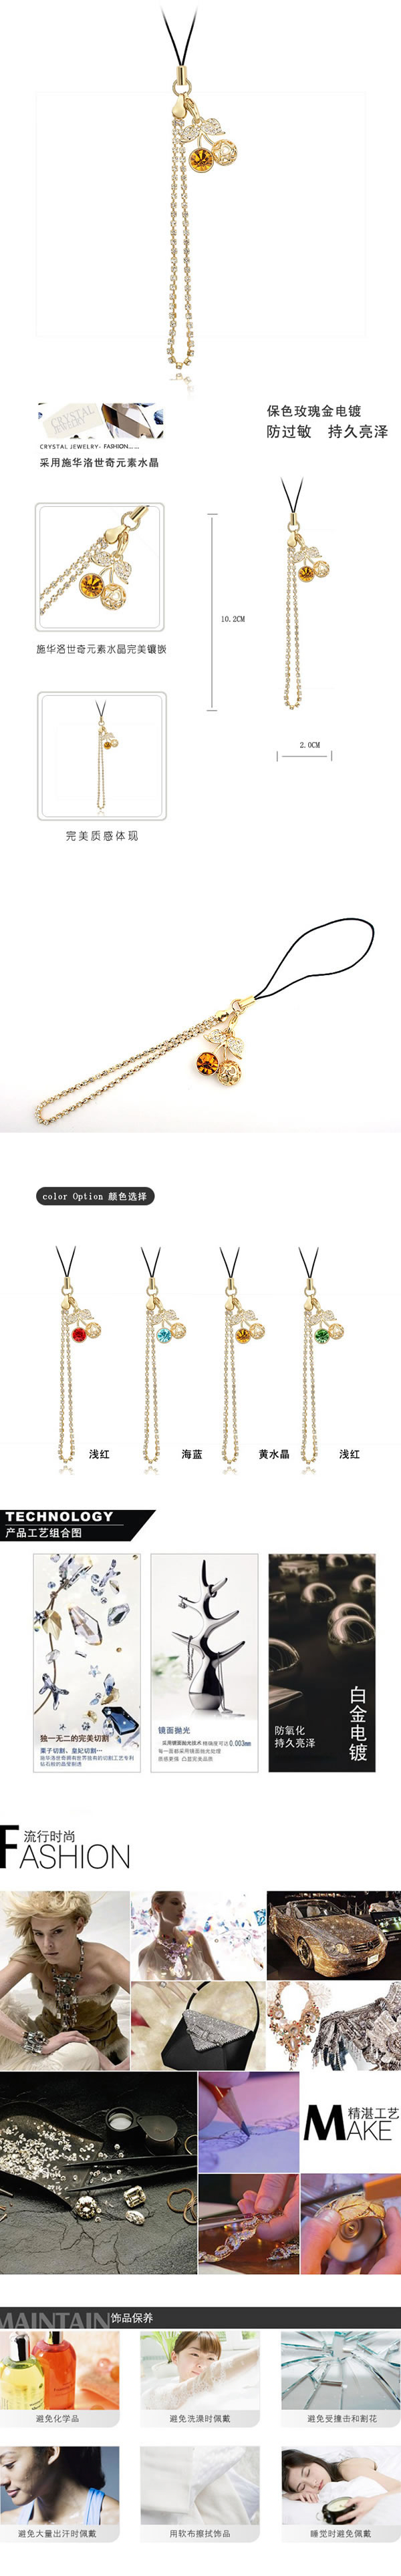 Luxury white Champagne
Champagne Cherry Design Alloy Mobile phone products,Anti-Dust Plug